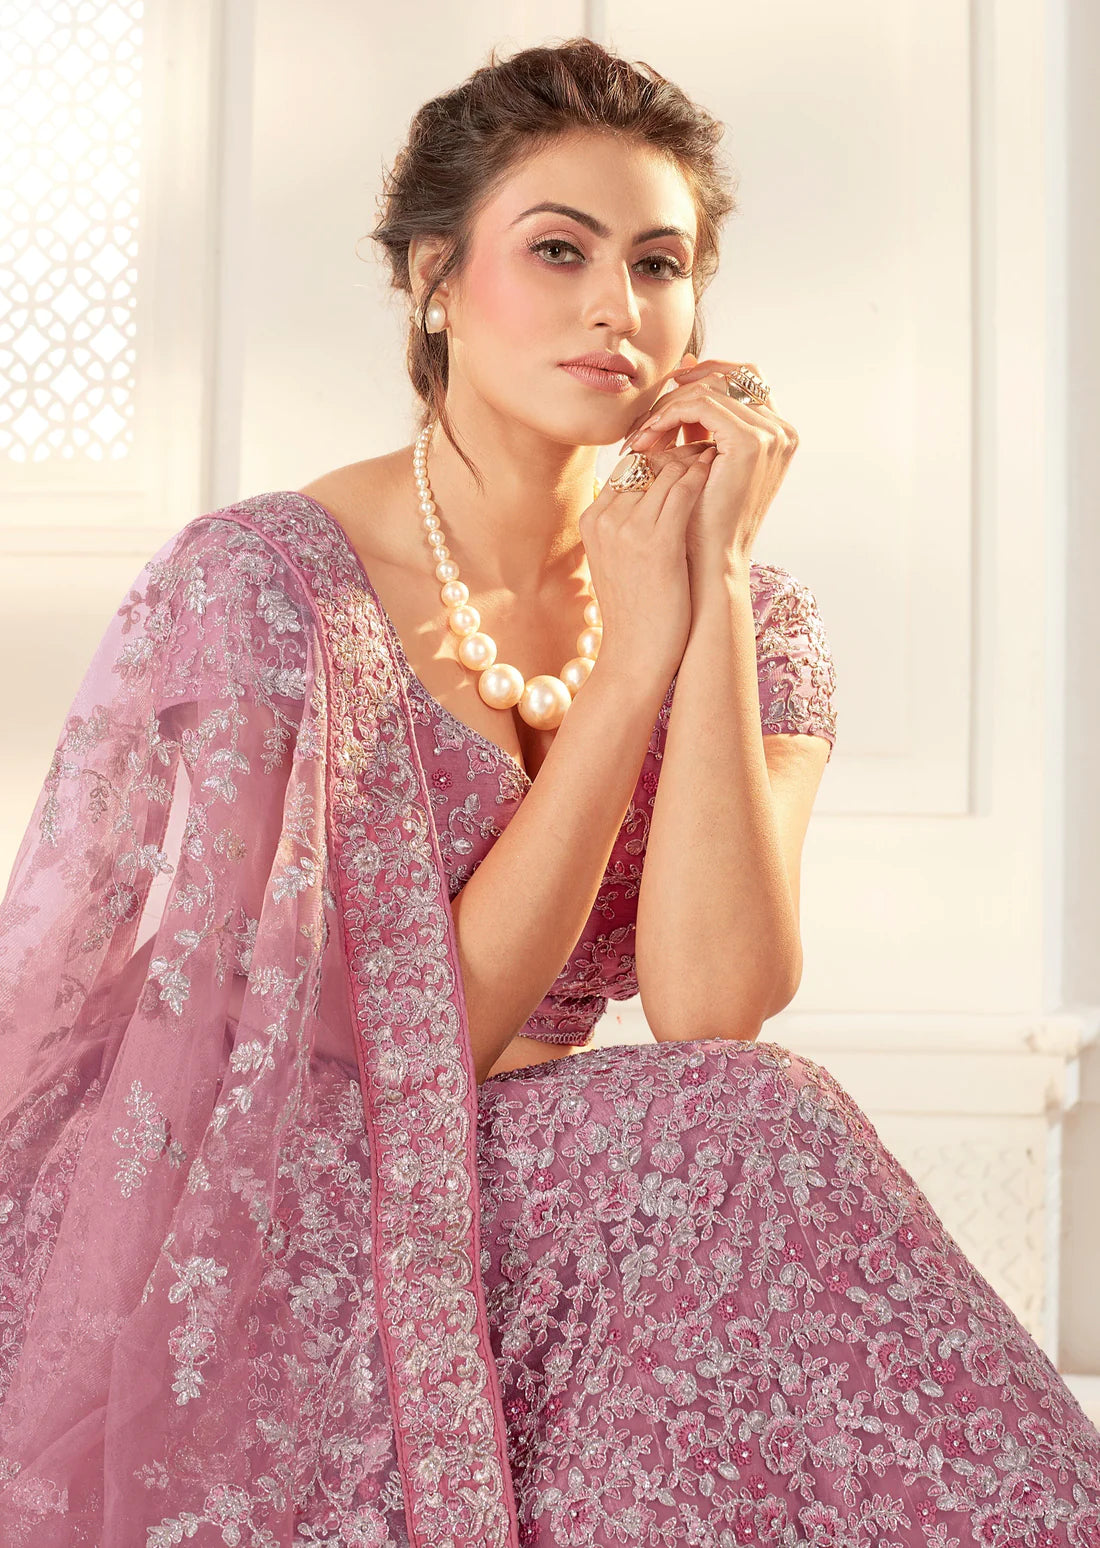 woman wearing pearl necklace posing in purple lehenga with heavy embroidery work in front of a white wall